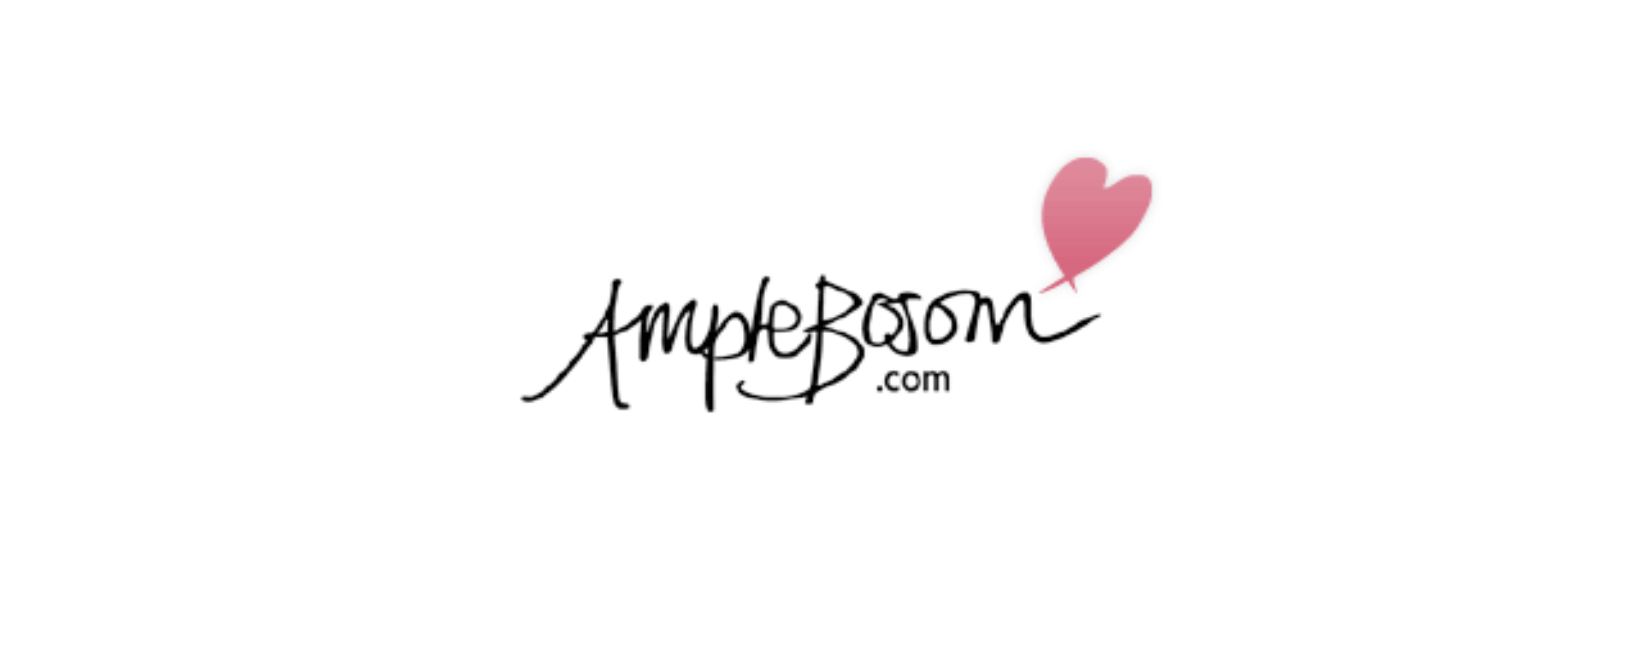 Ample Bosom Discount Codes 2022